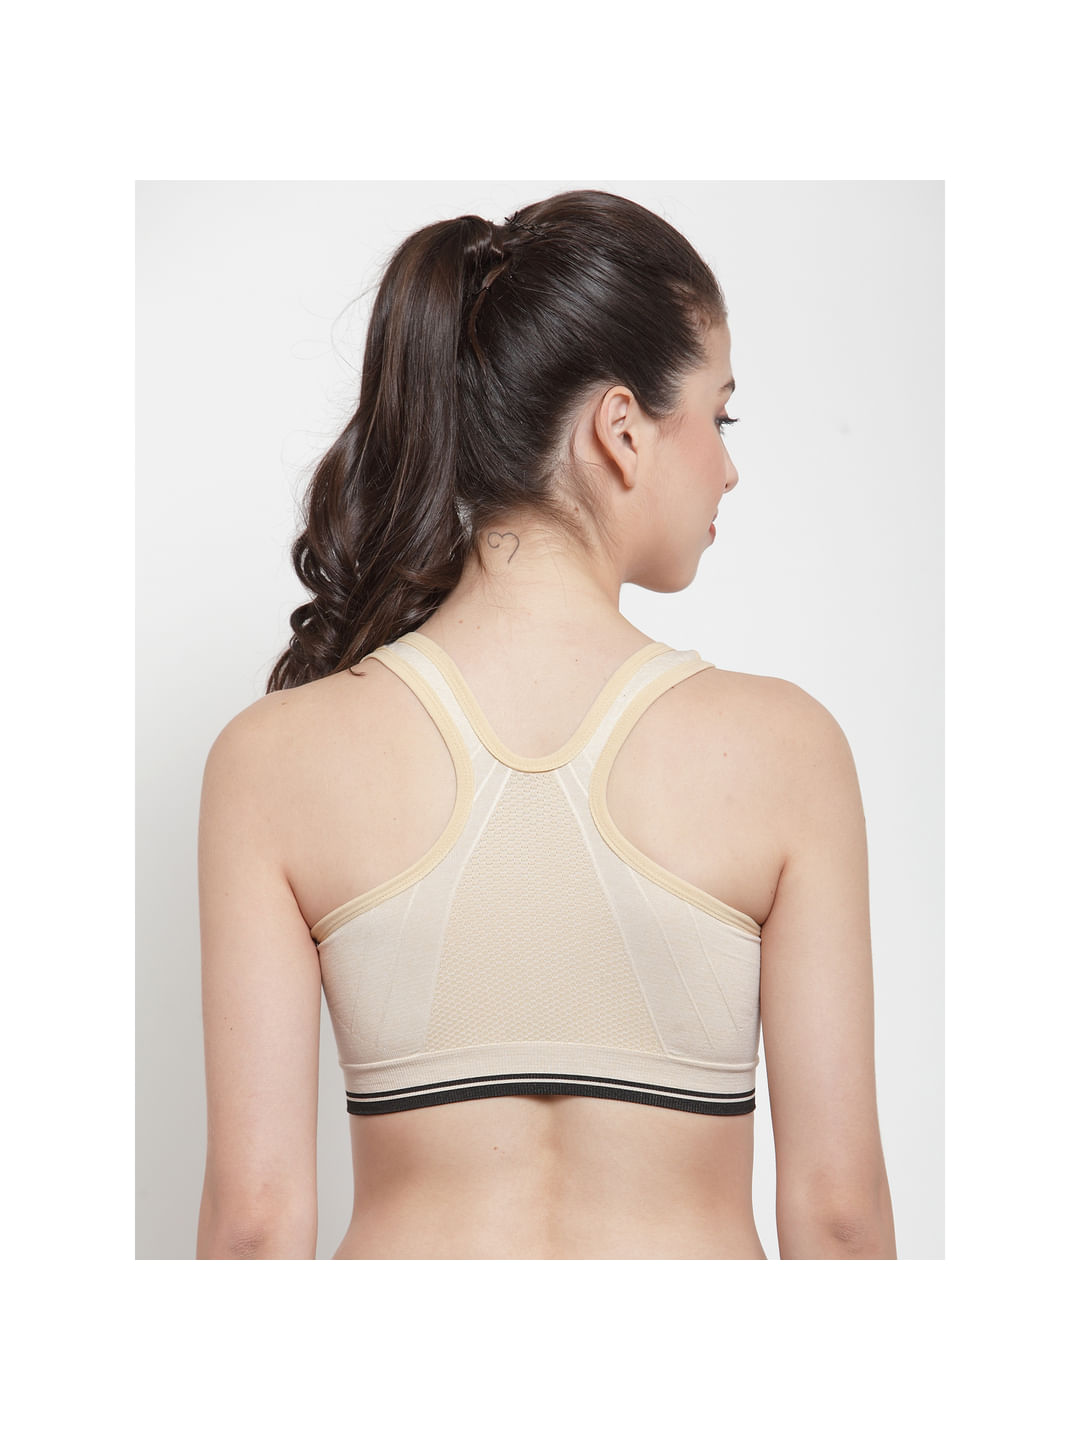 Shyaway Nylon Spandex L Sports Bra - Get Best Price from Manufacturers &  Suppliers in India